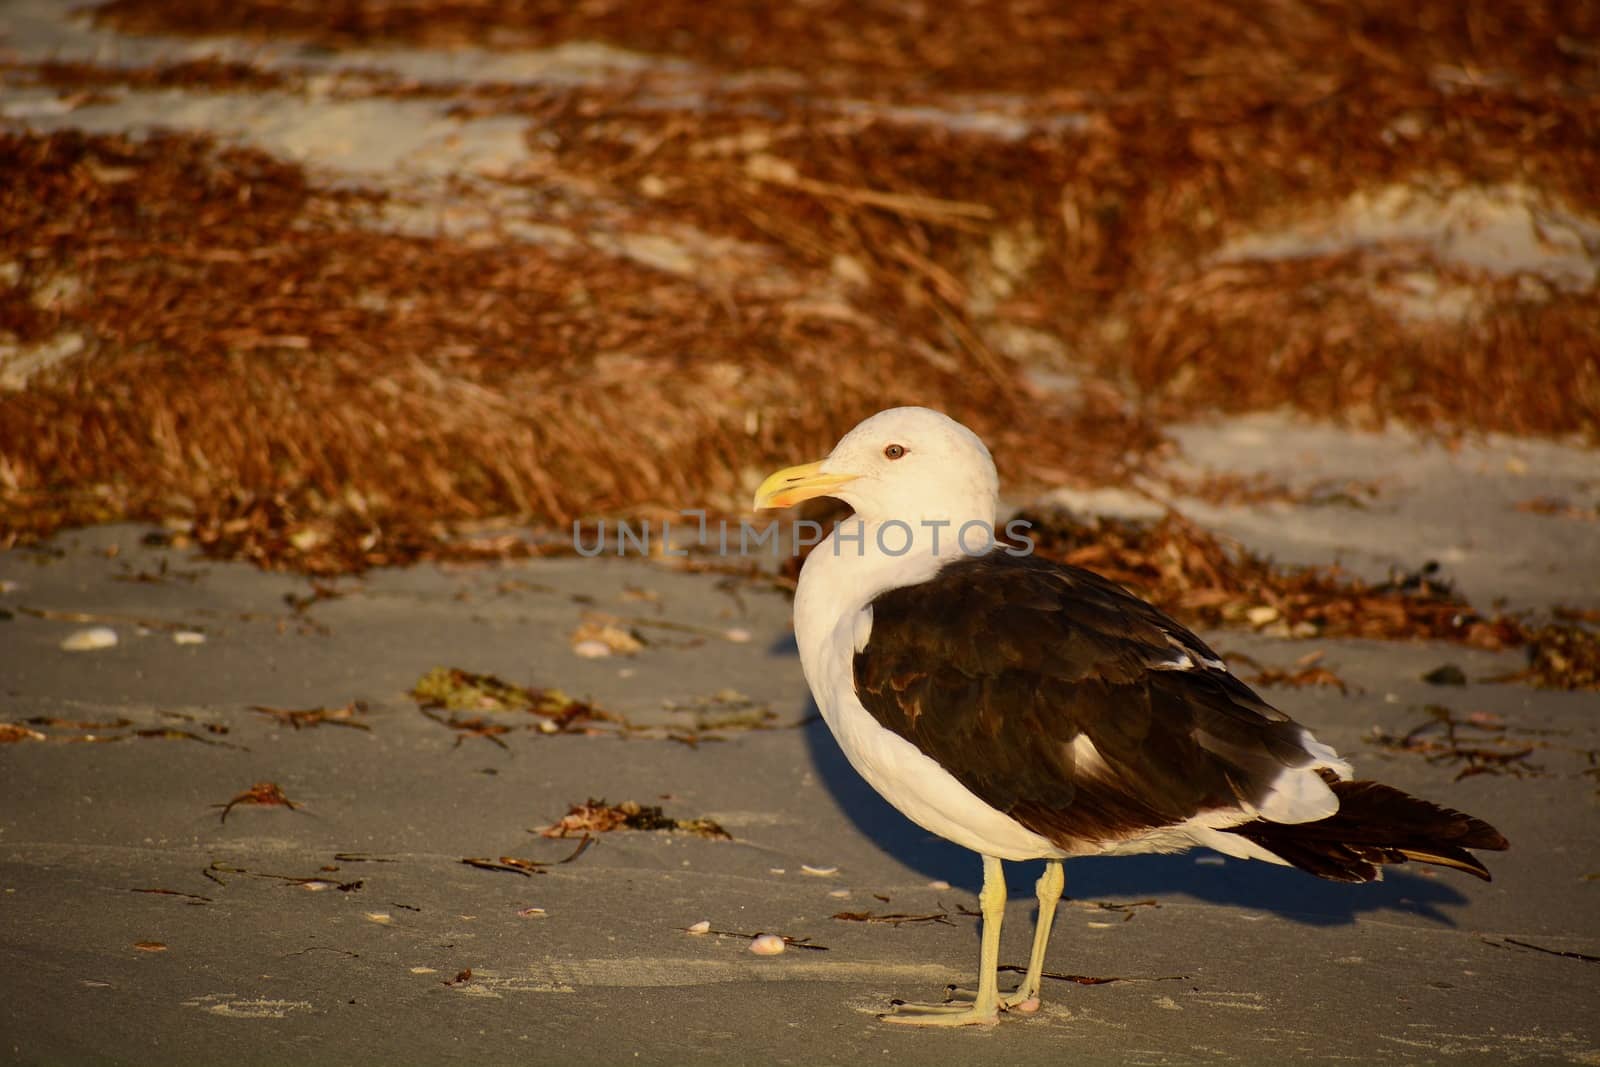 A close-up photo of a bird; mature Southern black-backed sea gull in natural environment